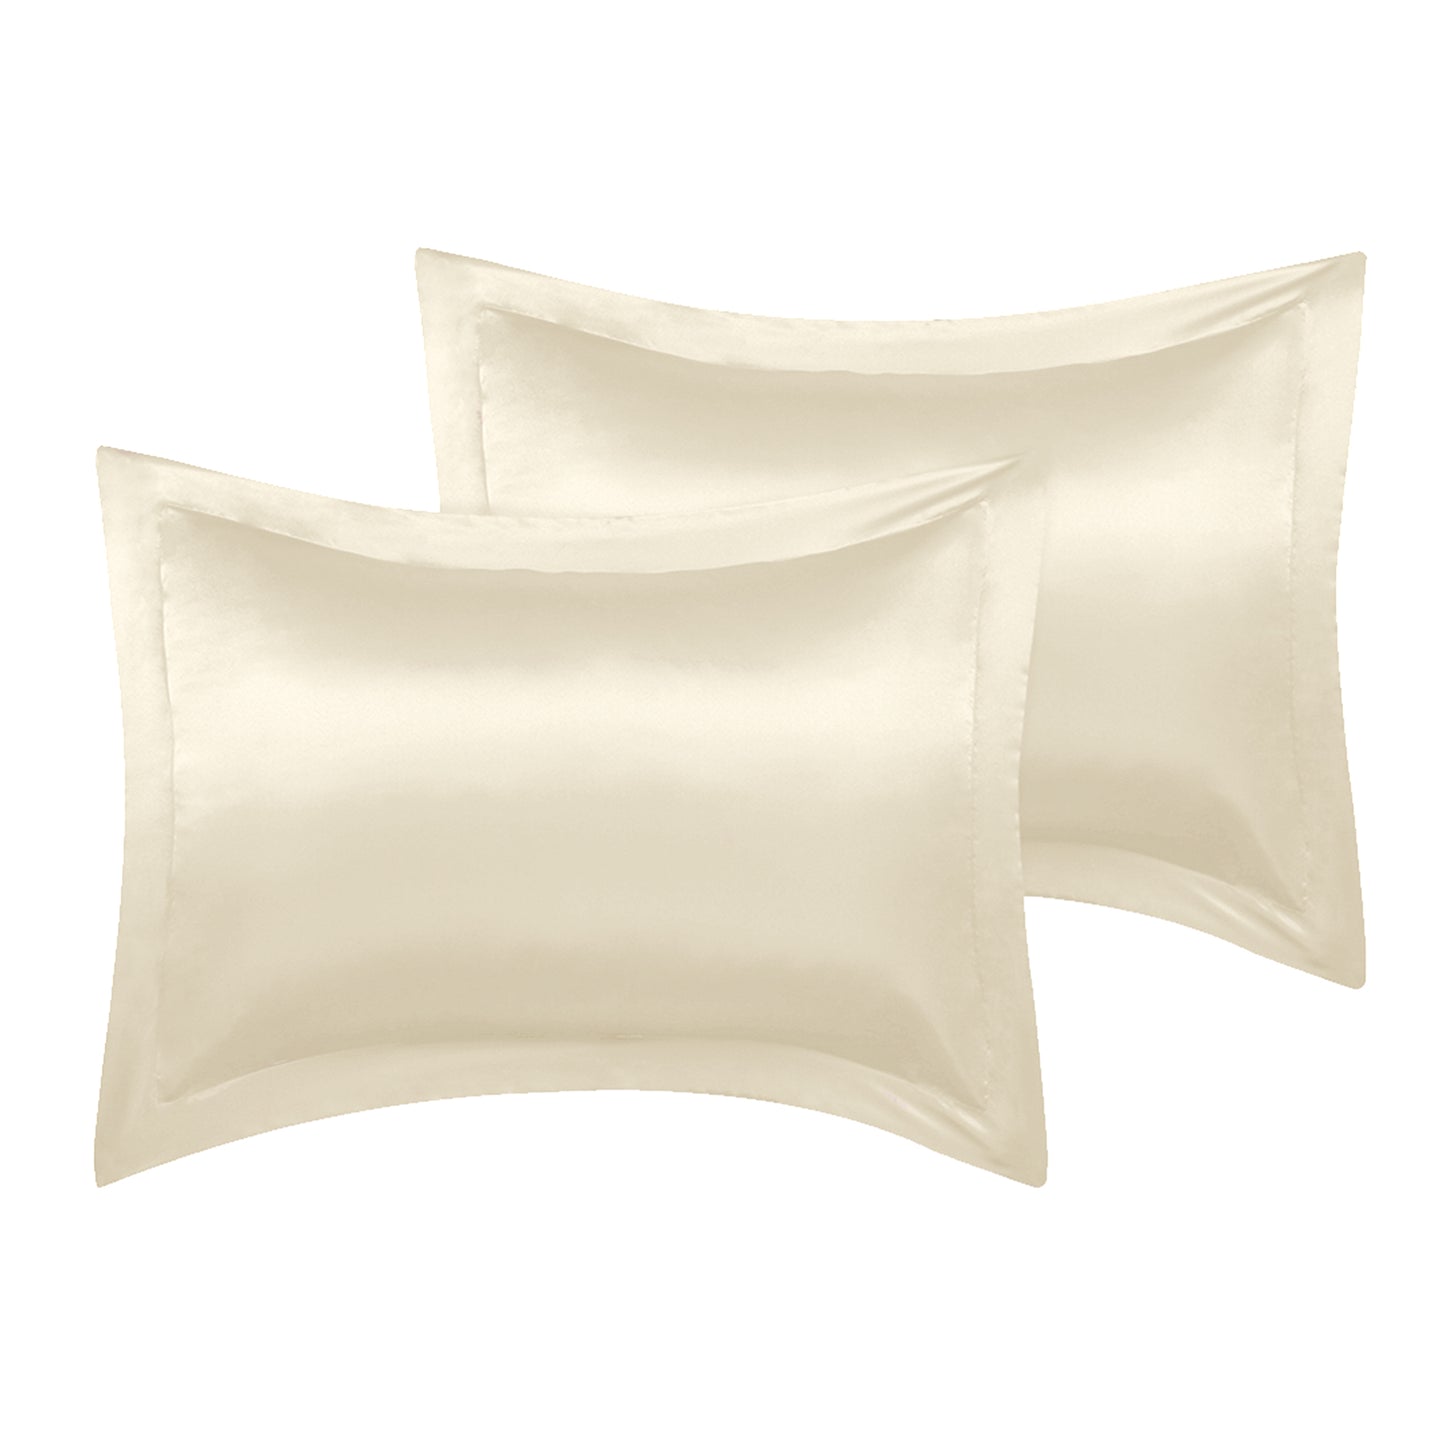 Charming Ivory Pillow Cover Set